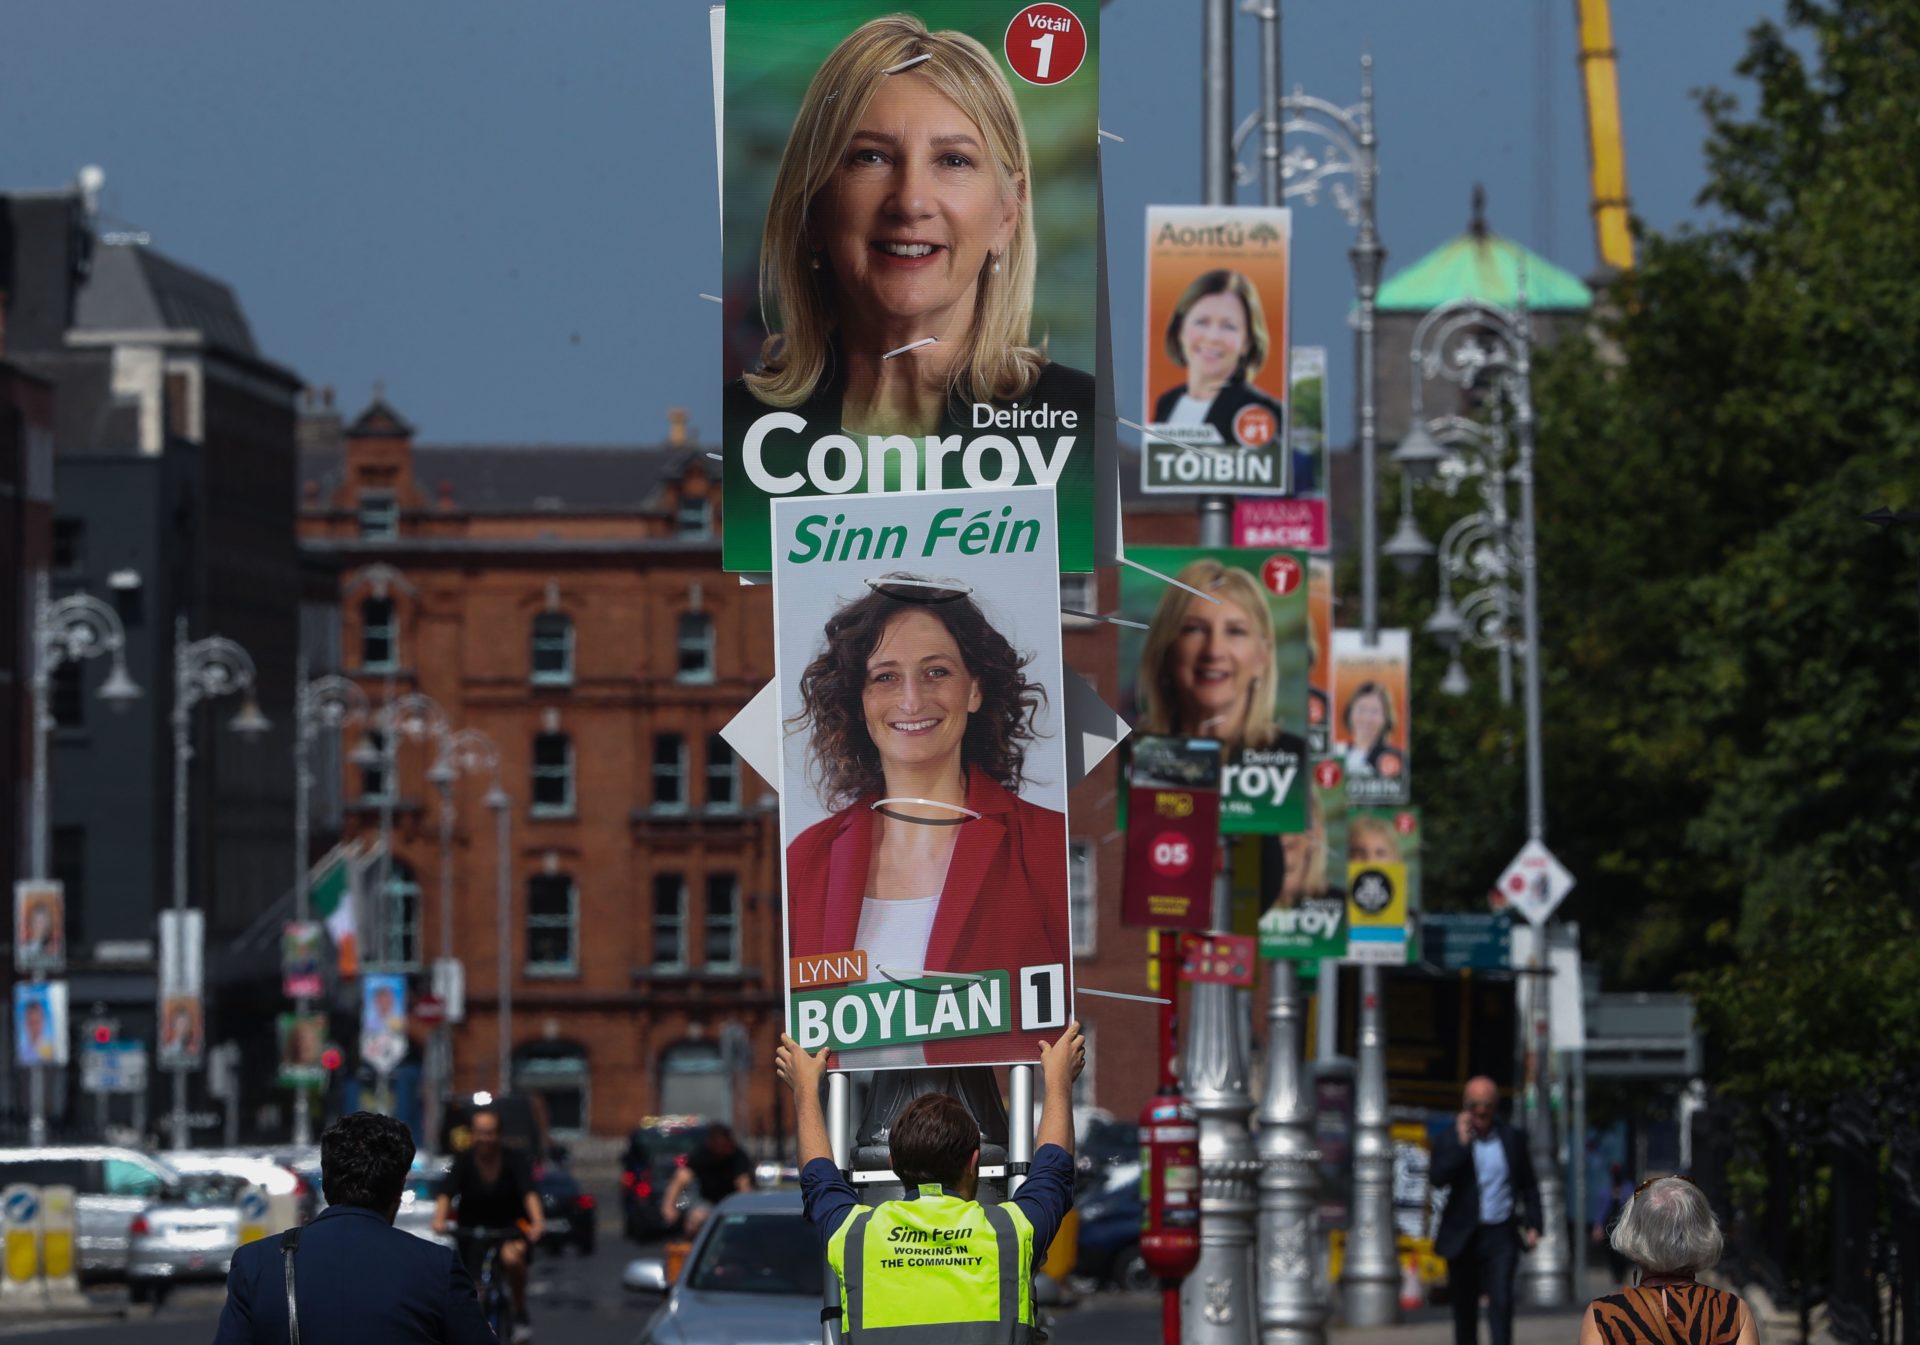 ‘It’s bordering on vandalism’ – Do we need election posters?